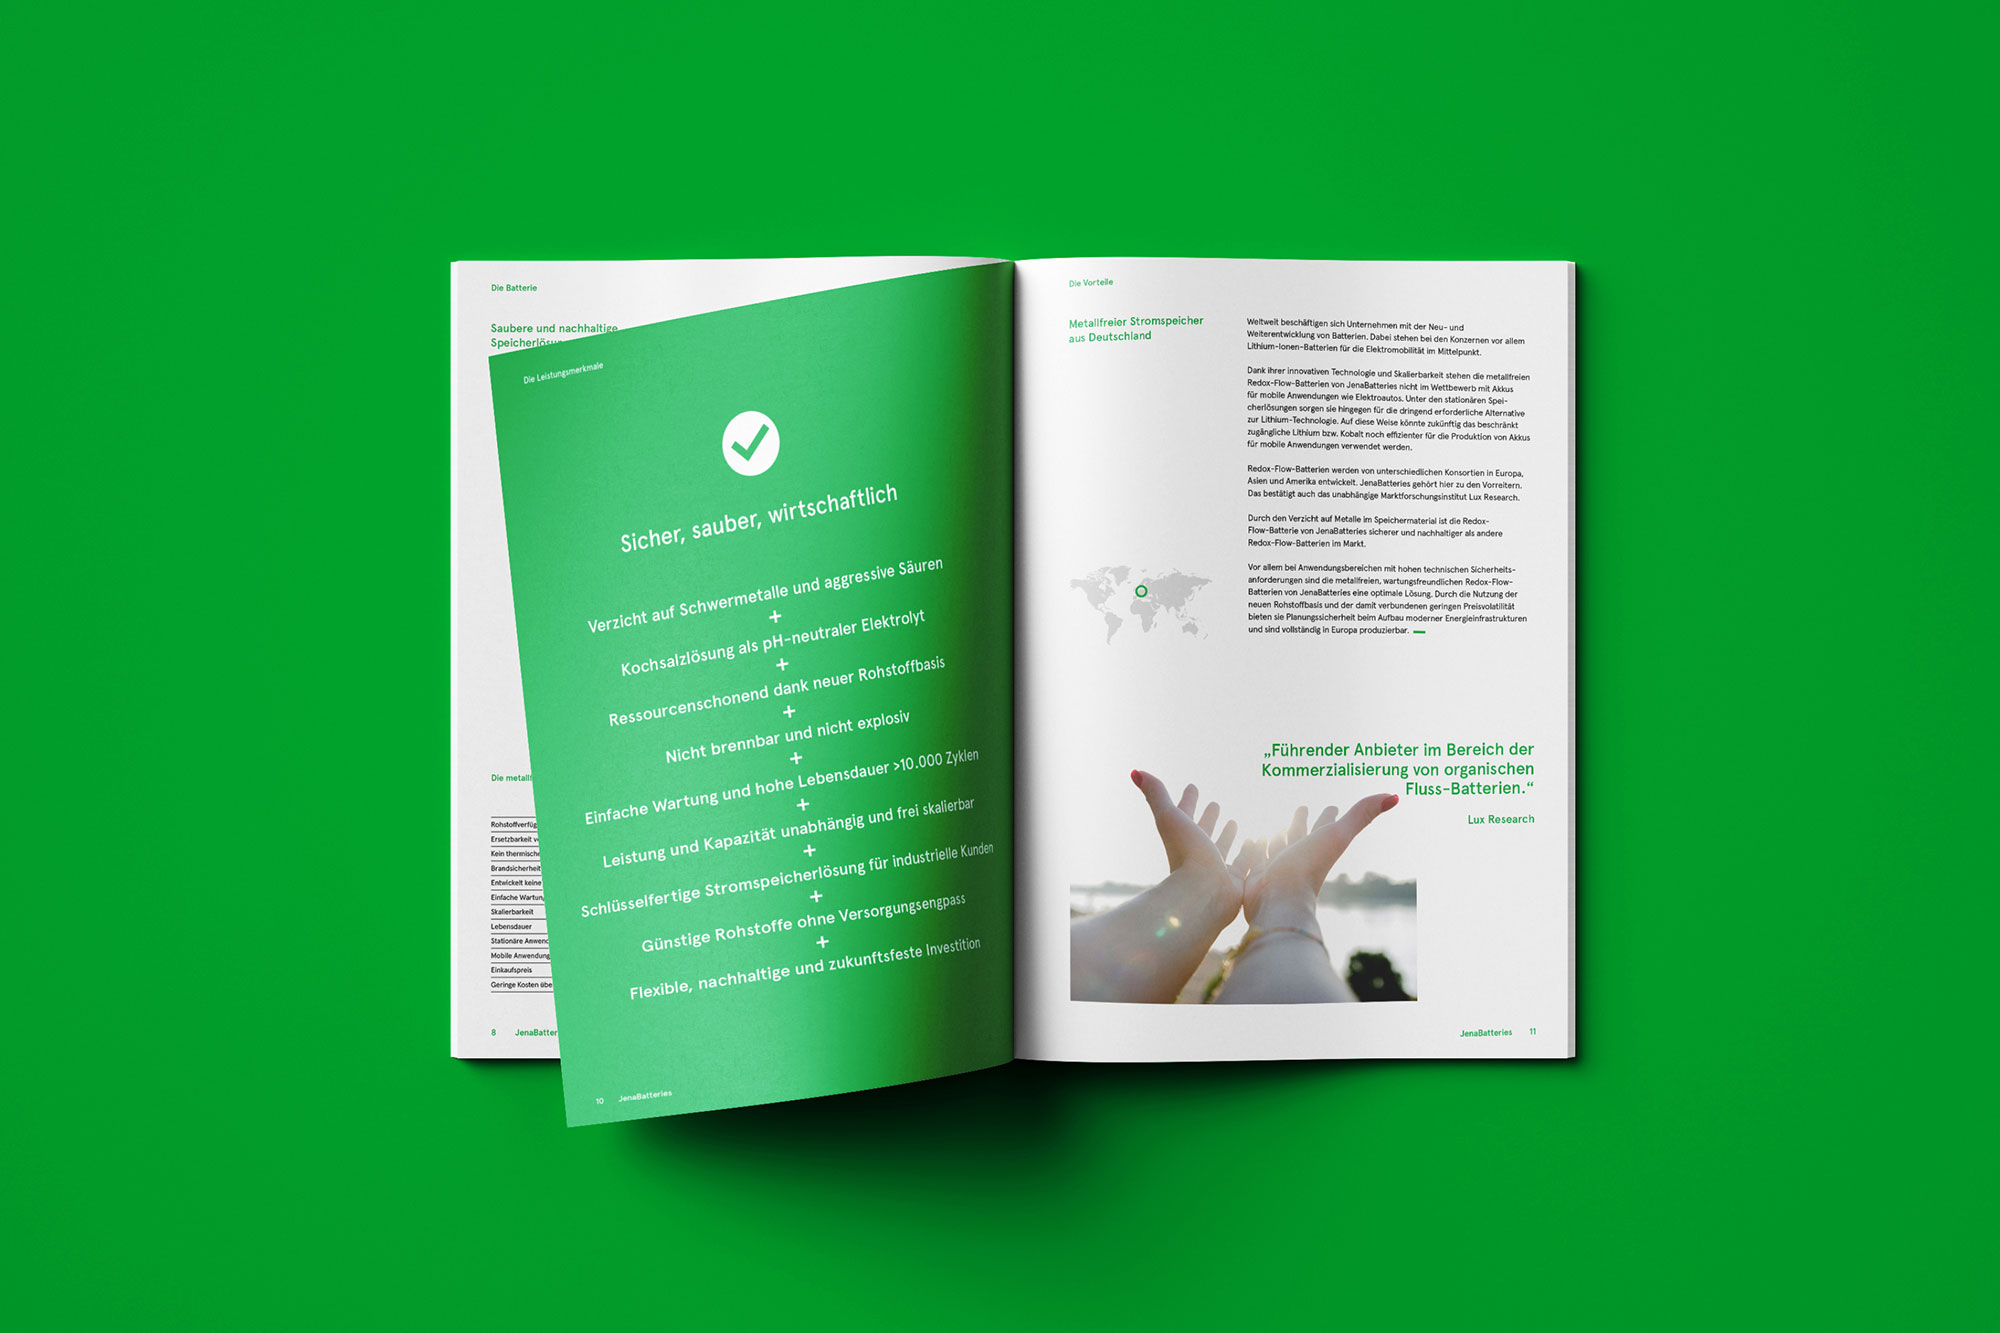 Photo of the info brochure for Jena Batteries on green background.